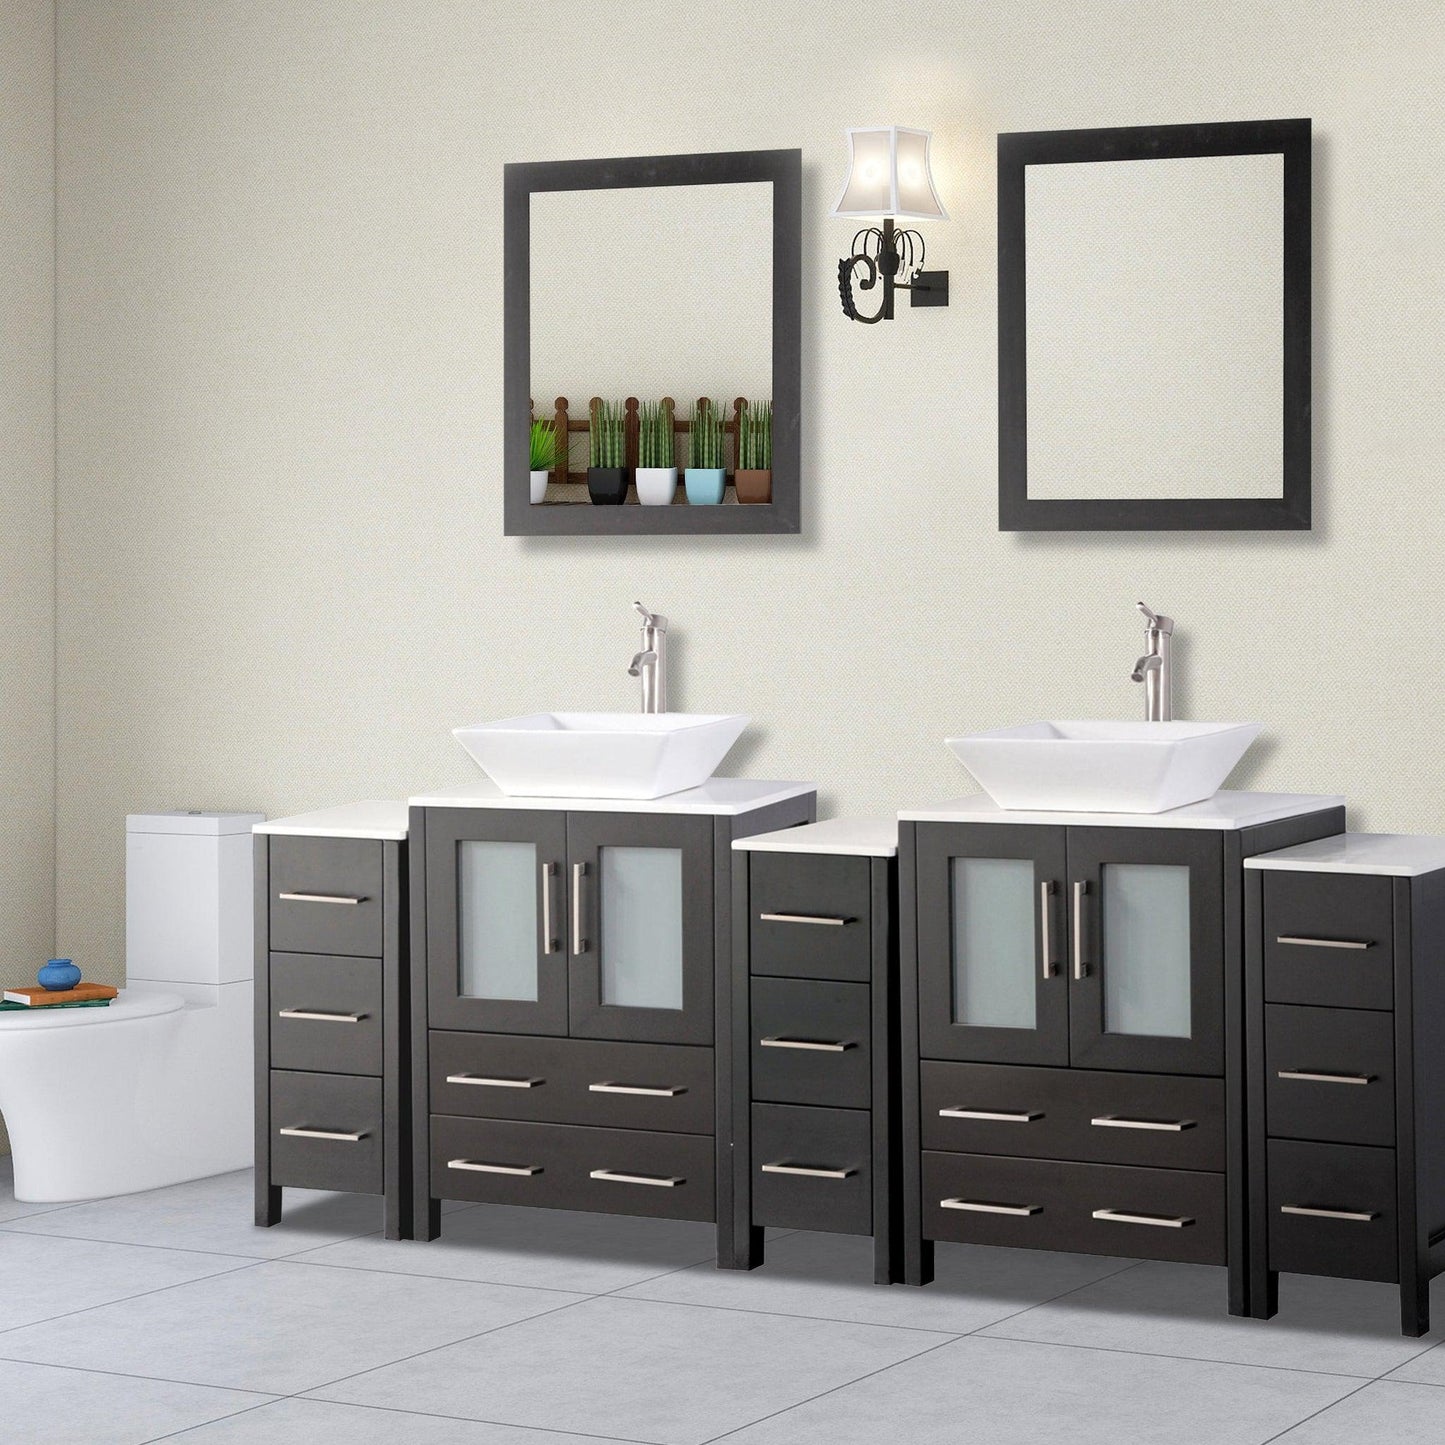 Vanity Art Ravenna 84" Double Espresso Freestanding Vanity Set With White Engineered Marble Top, 2 Ceramic Vessel Sinks, 3 Side Cabinets and 2 Mirrors